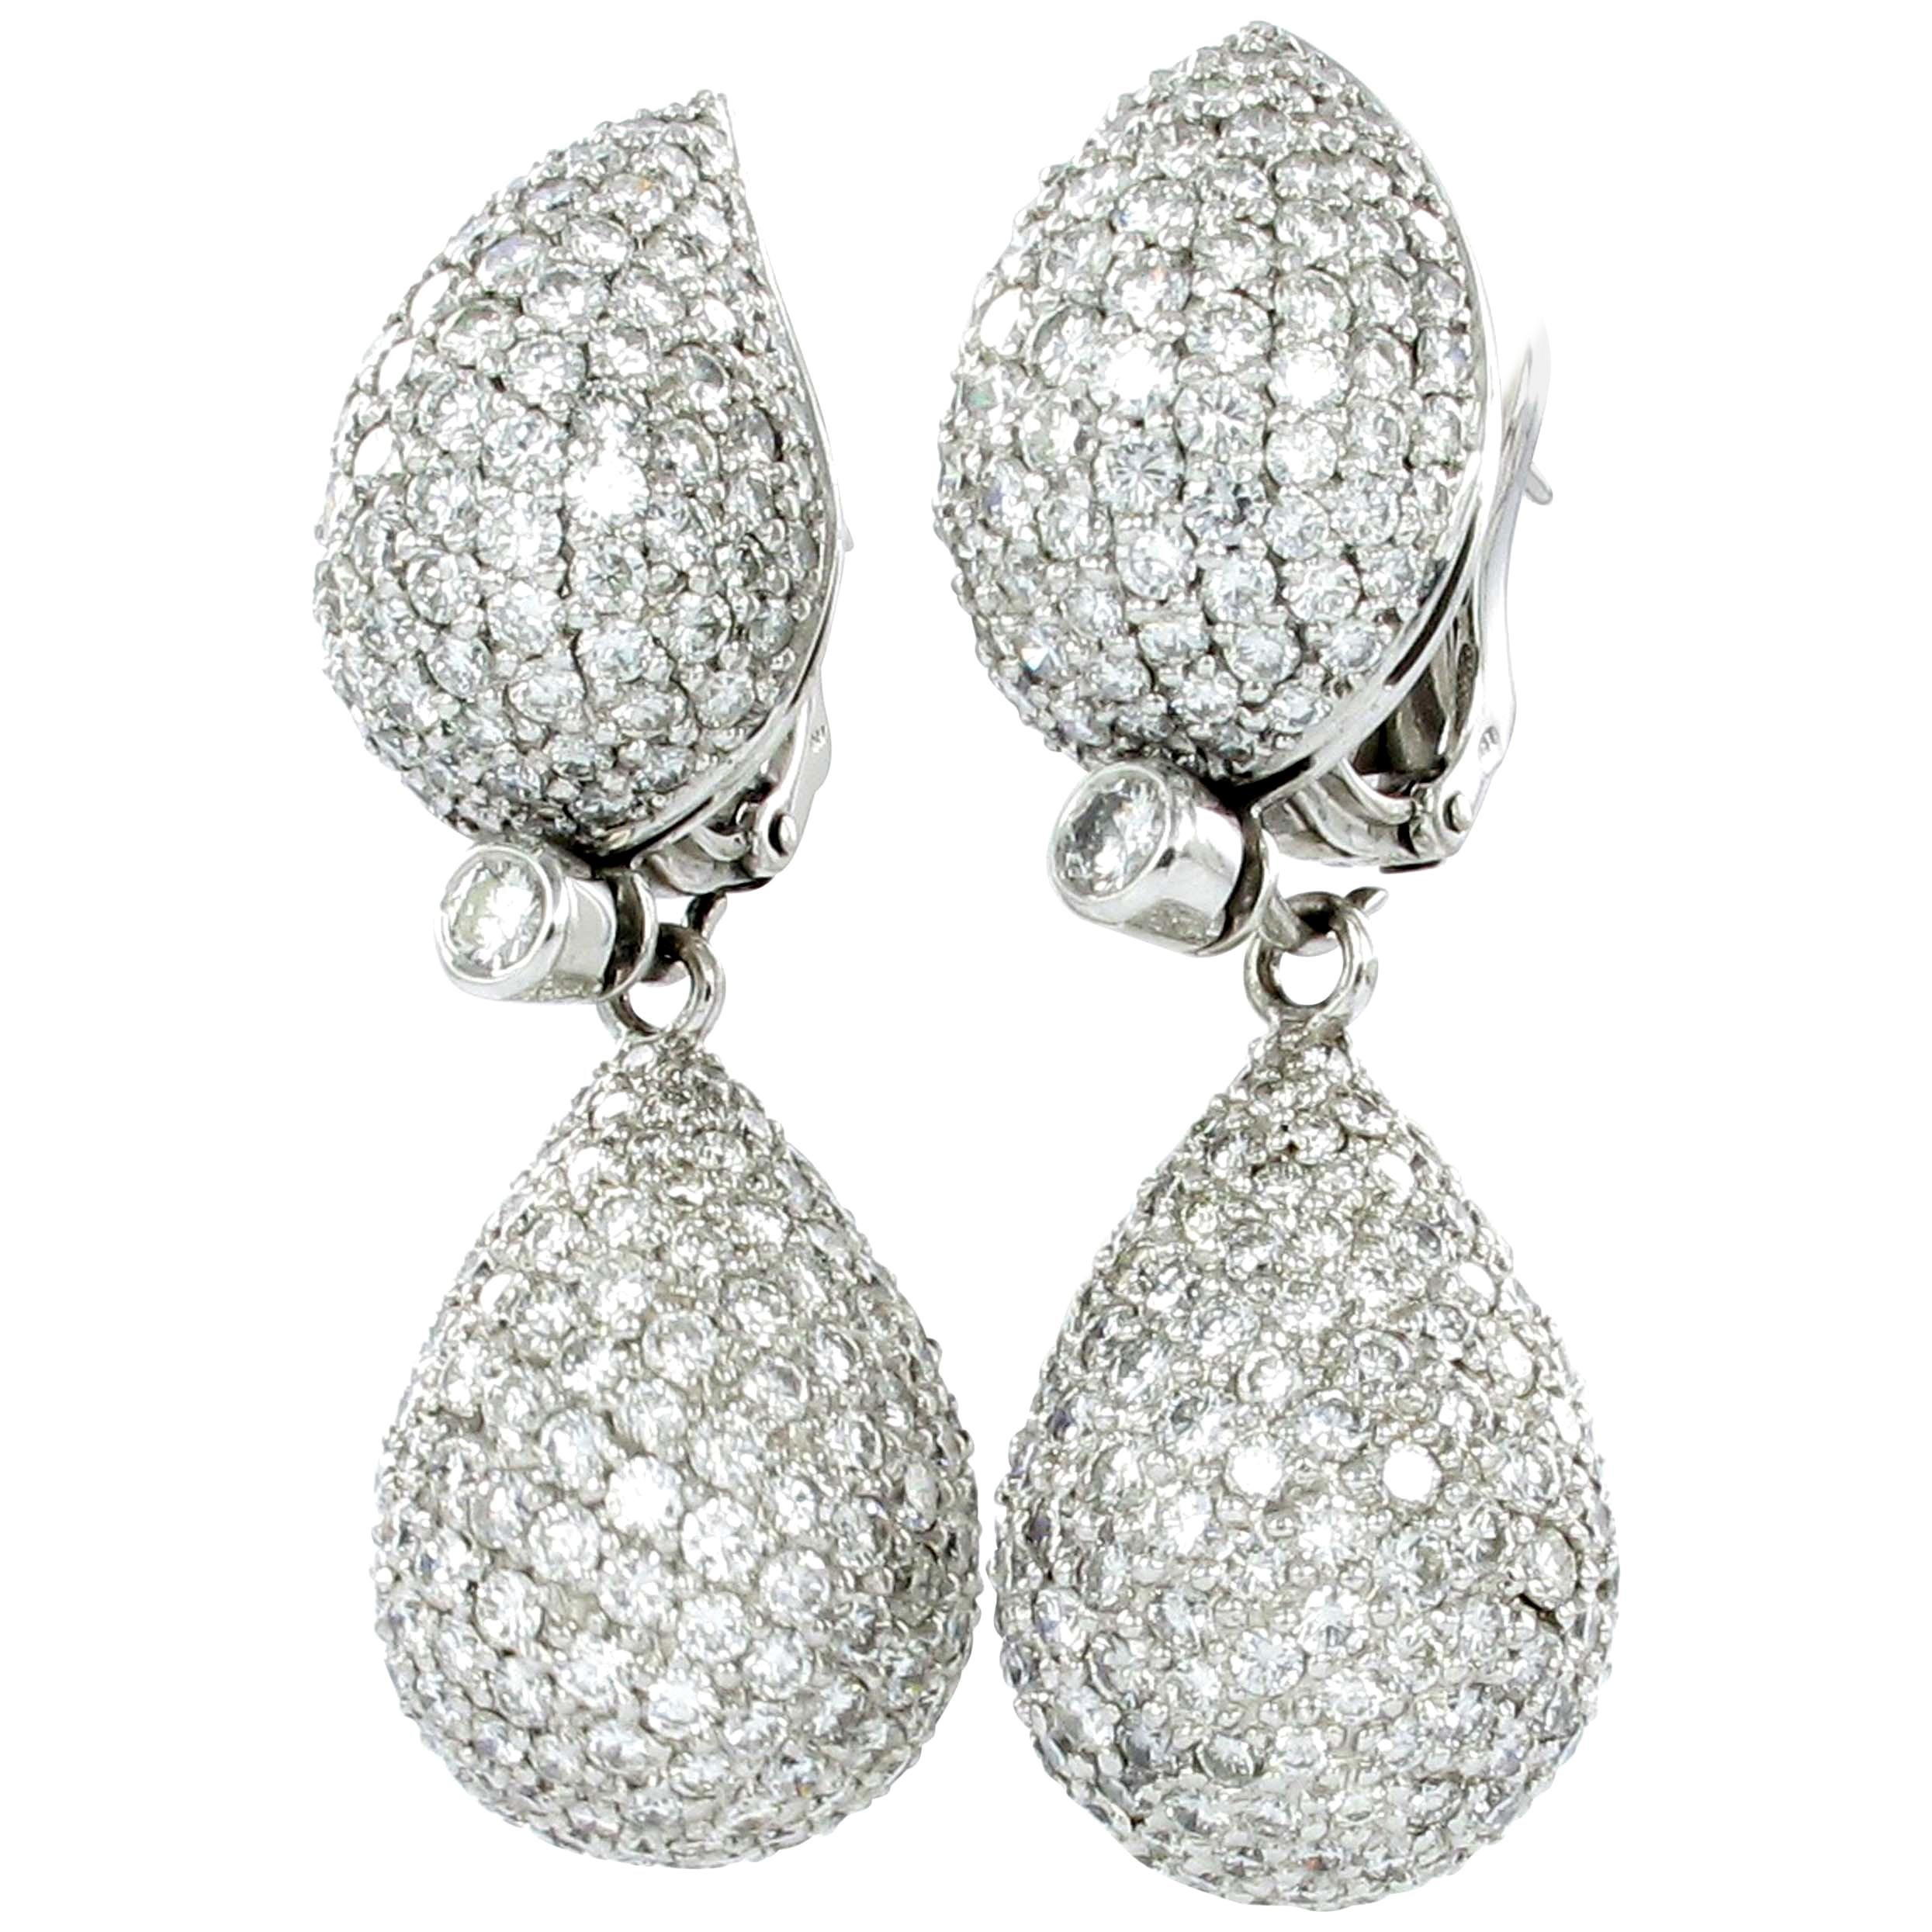 Elegant Pair of White Gold Diamond "Day and Night" Drop Earrings